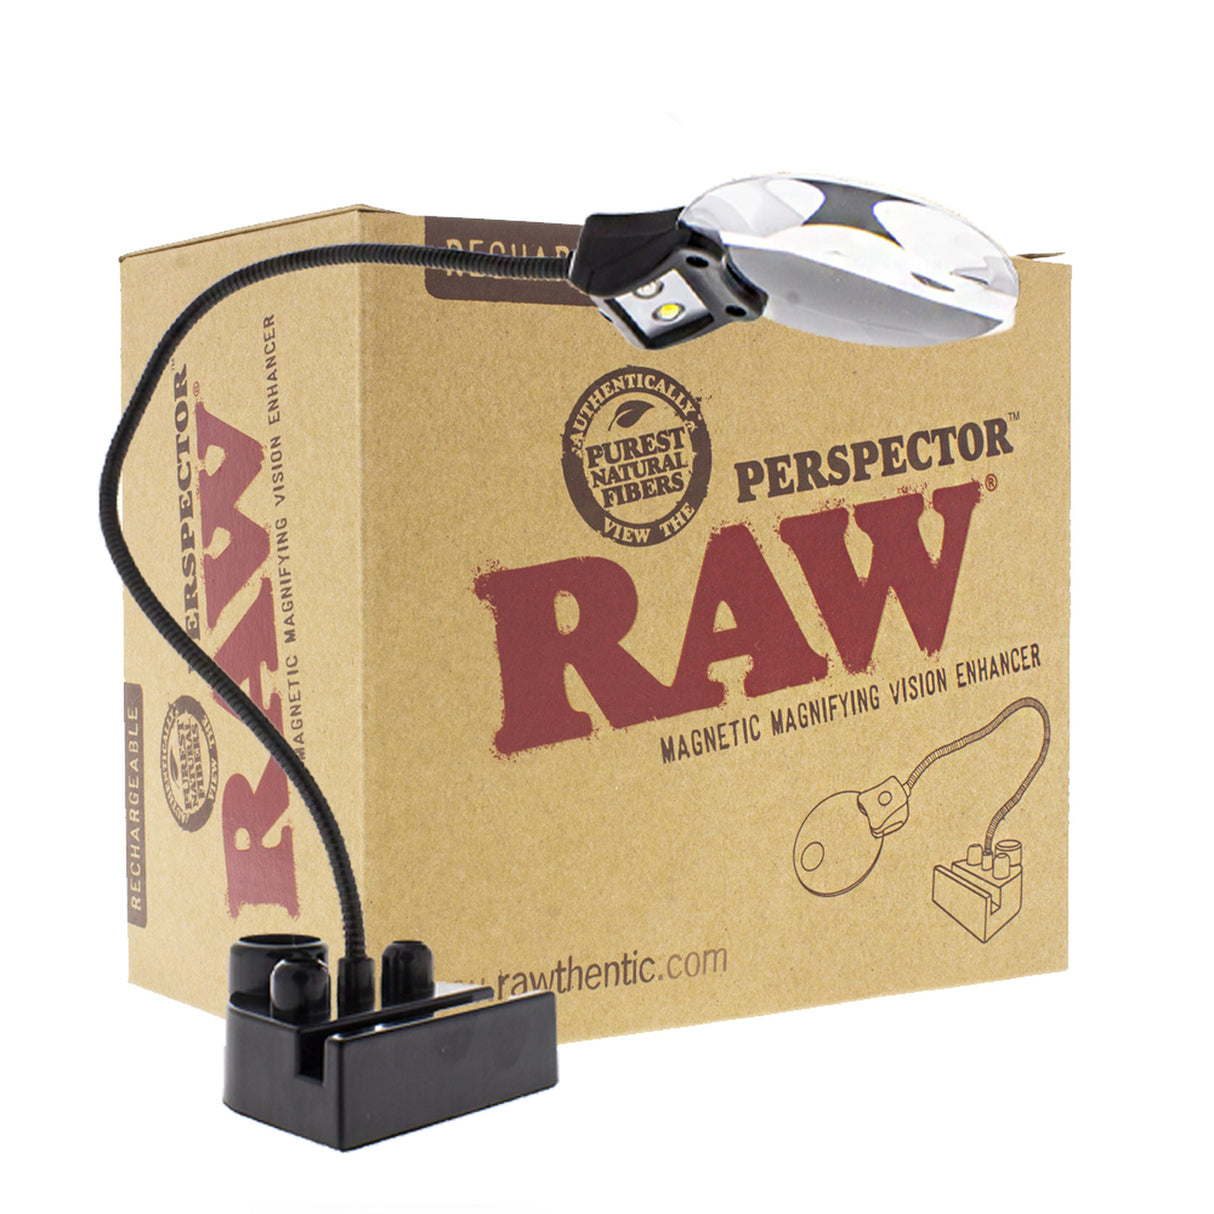 Raw - Perspector Rechargeable Magnetic Magnifying Vision Enhancer